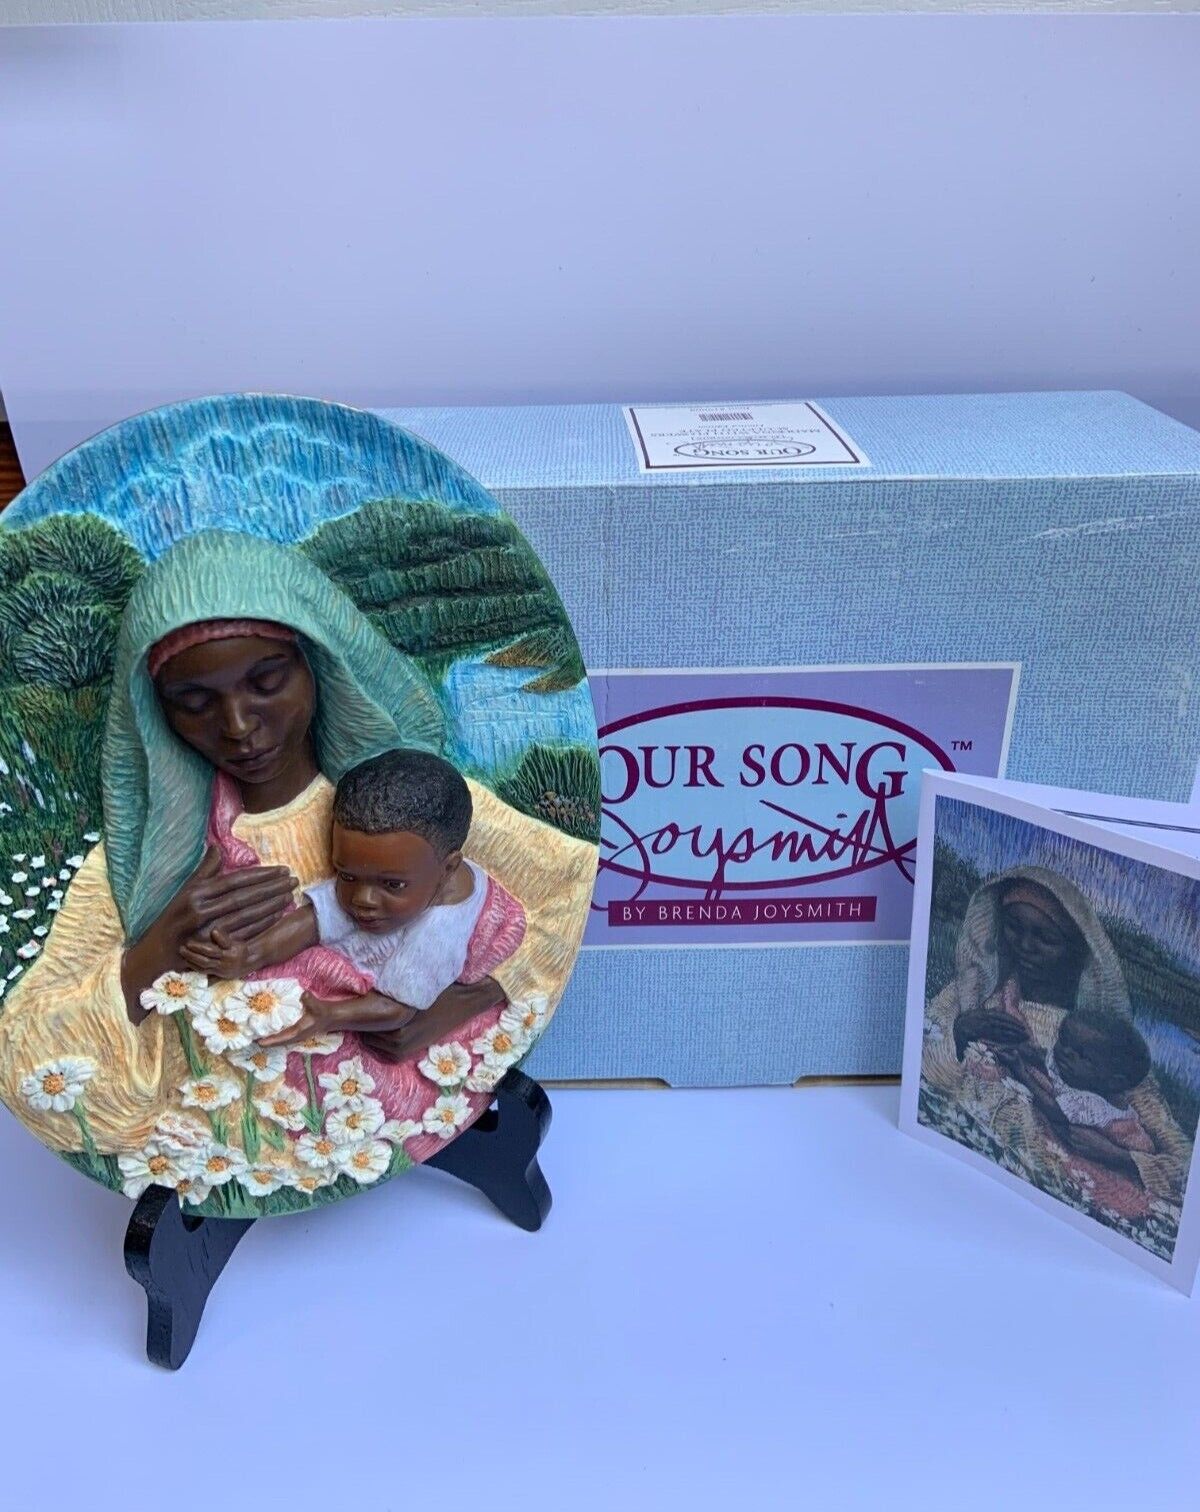 1998 Brenda Joysmith's Our Song MADONNA WITH FLOWERS Sculpted Plate #19008